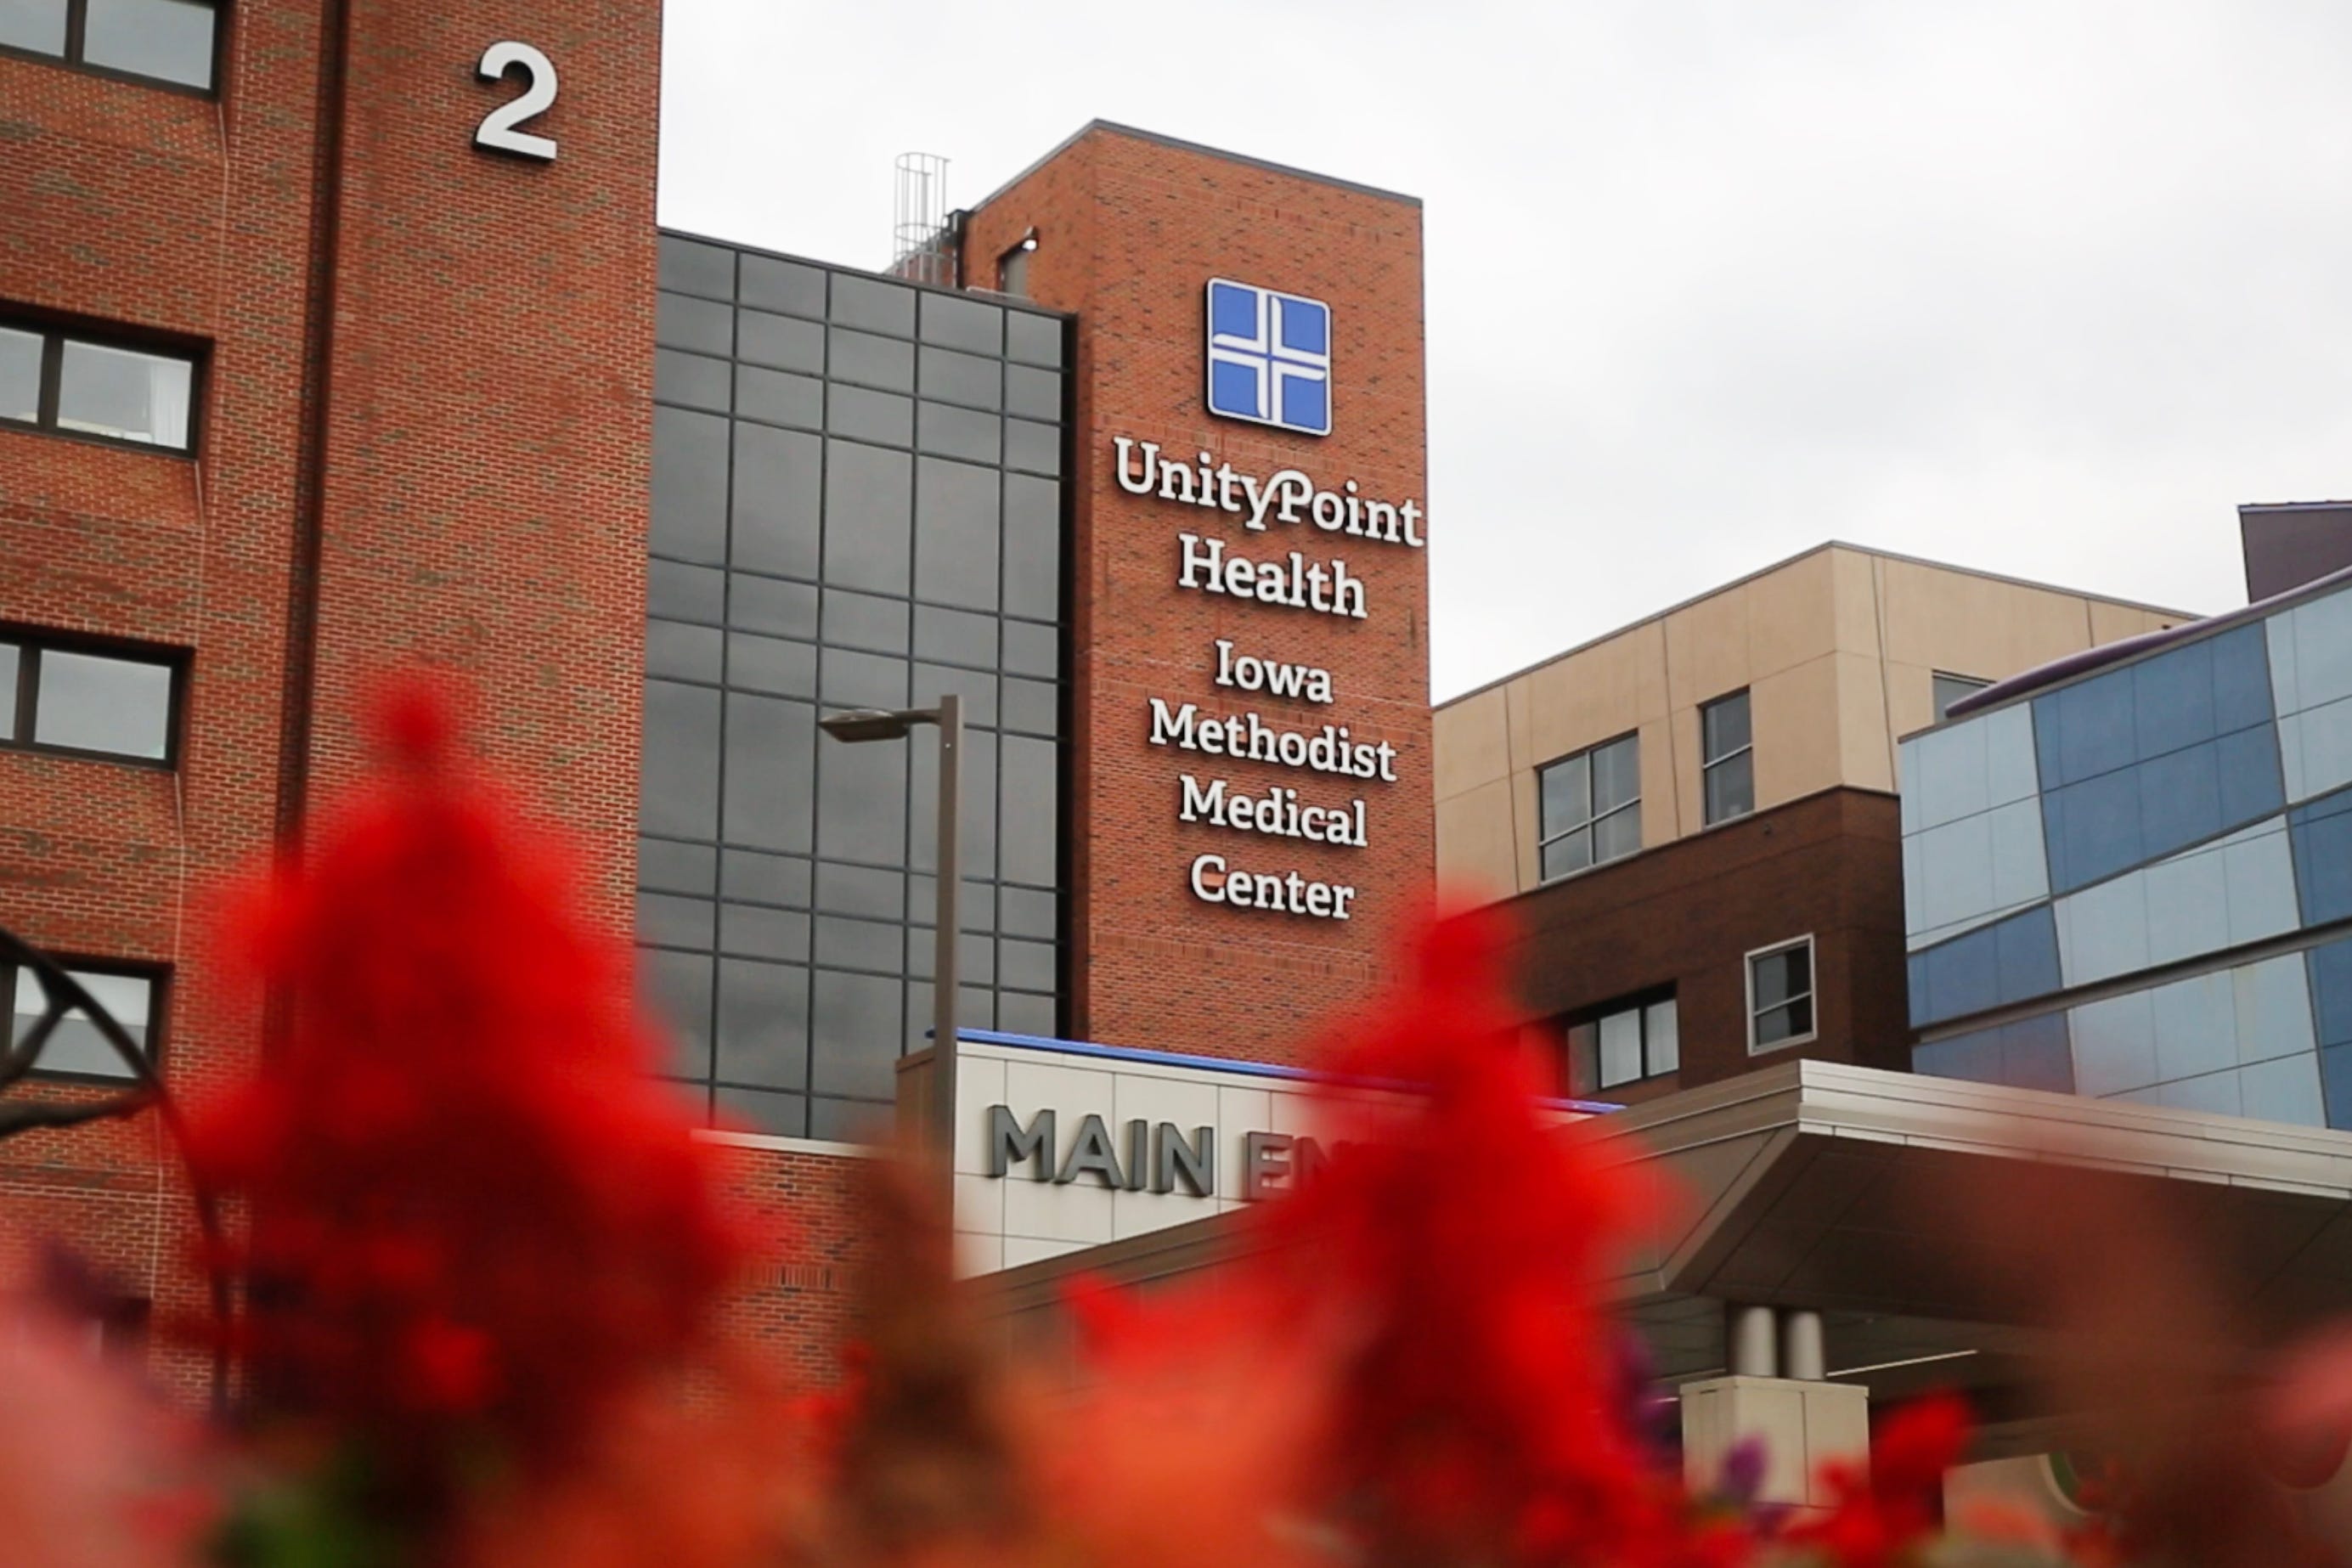 Des Moines' UnityPoint Health building is seen on June 28, 2019. Formed in 1993, the Iowa Health System started as a merger of the Iowa Methodist Medical Center and Iowa Lutheran Hospital.